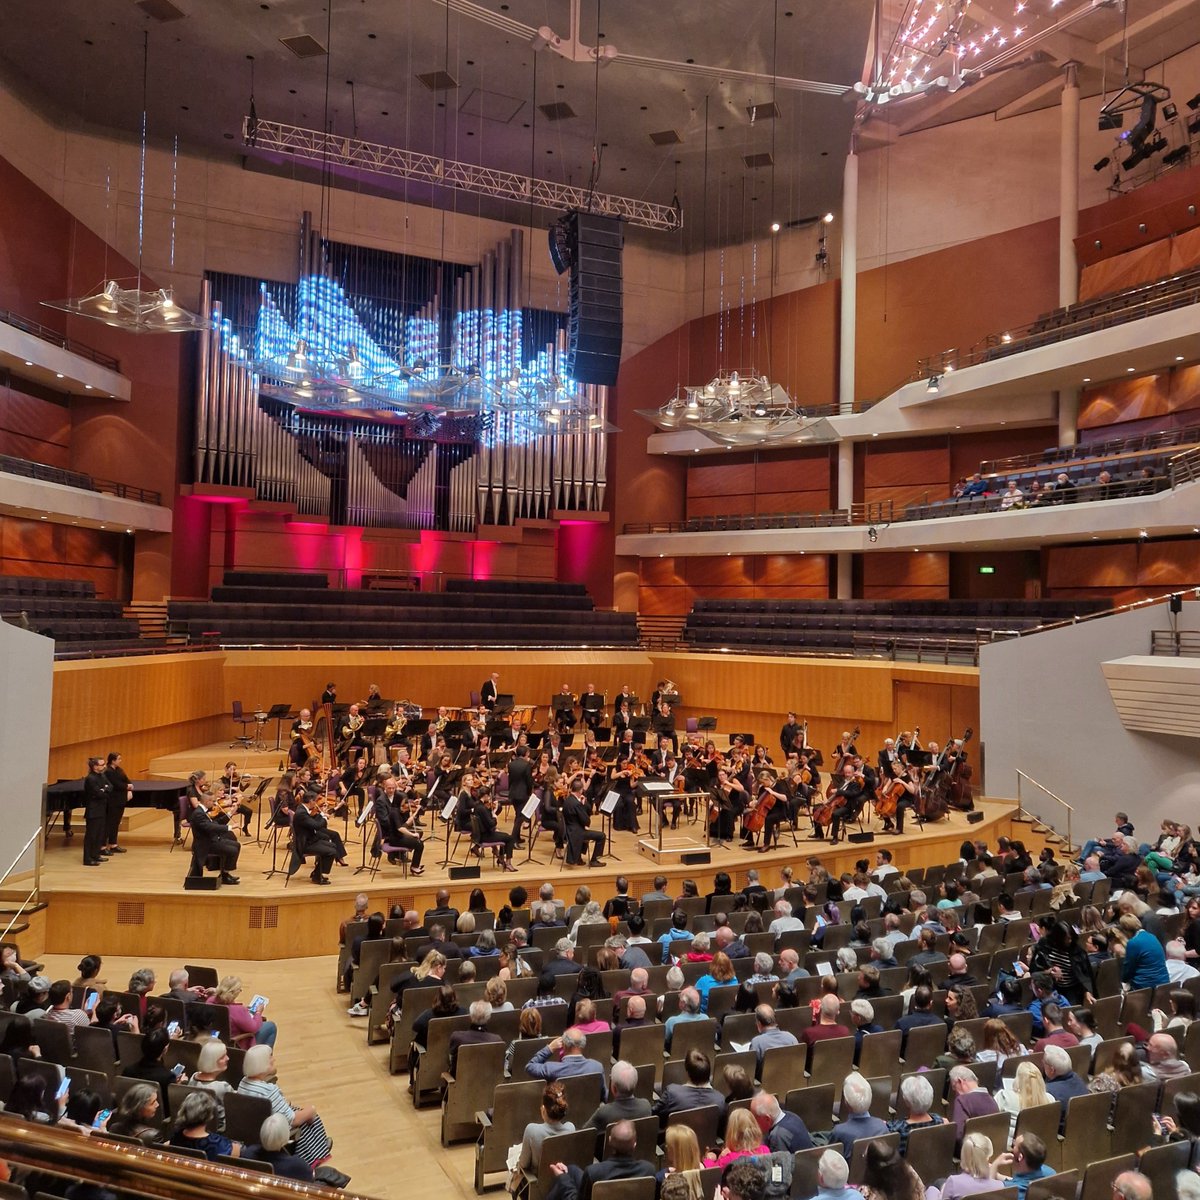 We had a fantastic weekend up north at the @BridgewaterHall and @Sage_Gateshead, conducted by our Principal Conductor Edward Gardner and joined by brilliant @grosvenorpiano 🎶 A big, big thank you to everyone who came to see us! 💜